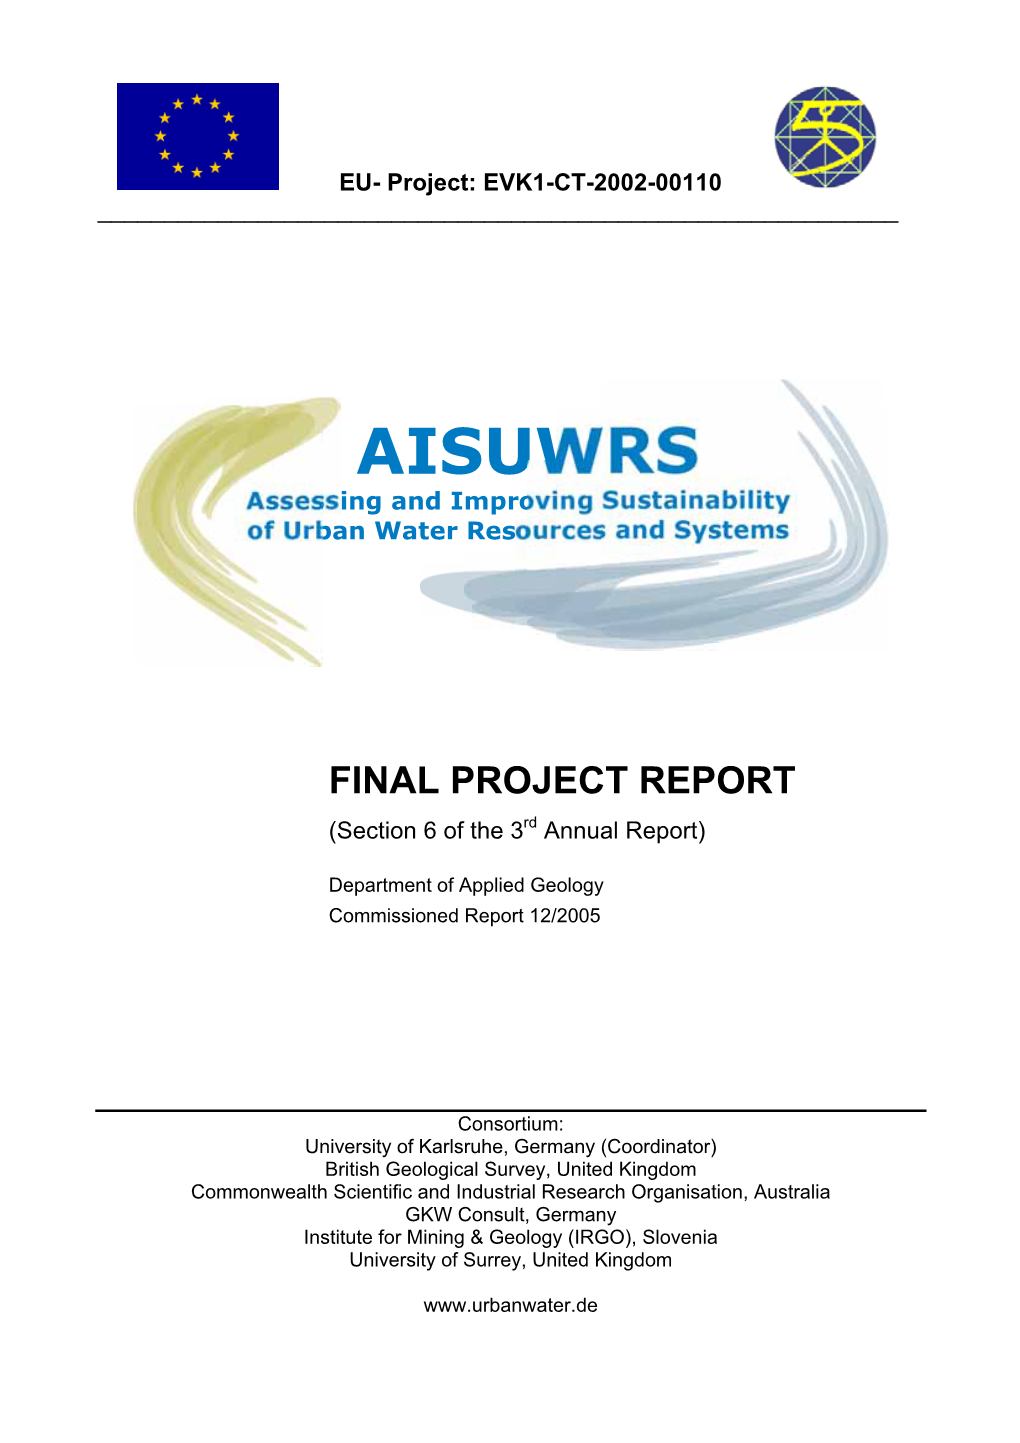 AISUWRS Final Project Report